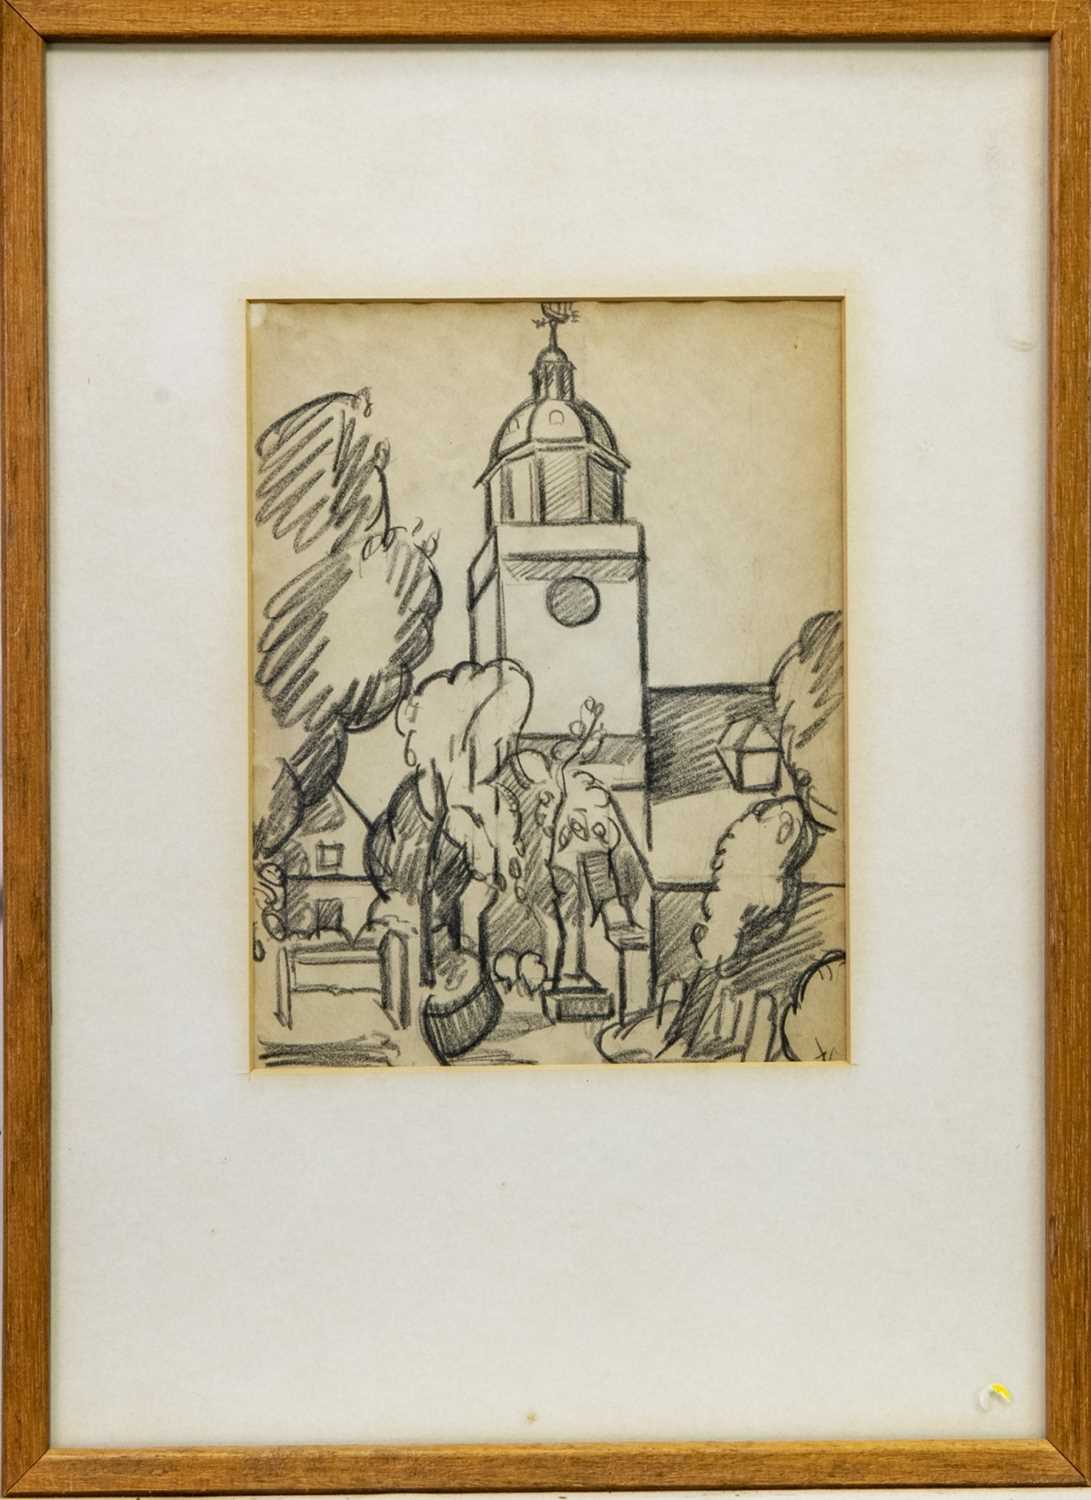 Lot 26 - DOMED BUILDING, SOUTH OF FRANCE, A PENCIL SKETCH BY MARGARET MORRIS